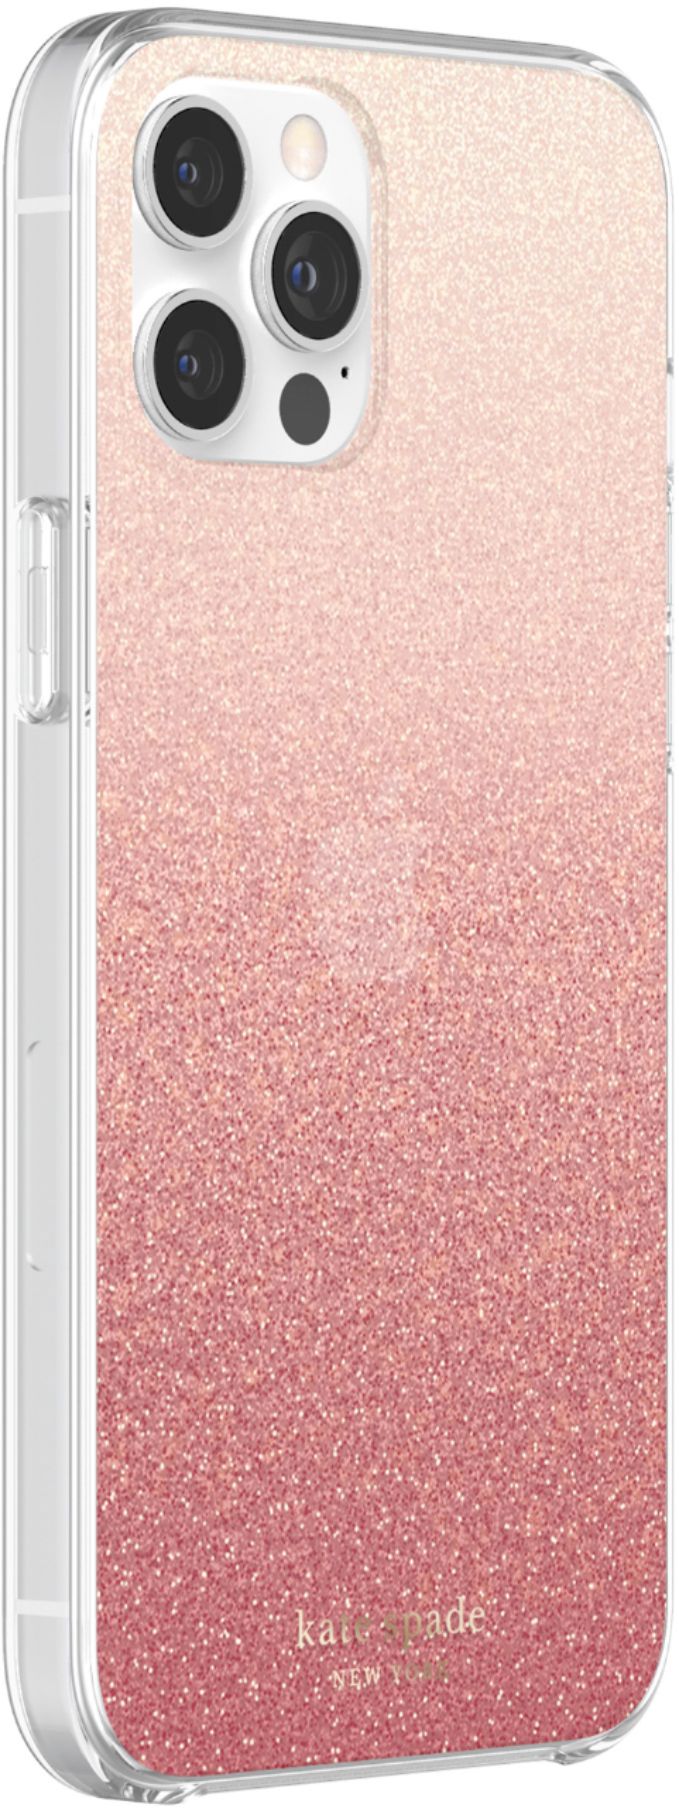 Best Buy: kate spade new york Protective Hardshell Case for iPhone 13/12  Pro Max Pink Ombre Glitter KSIPH-154-GLOSN